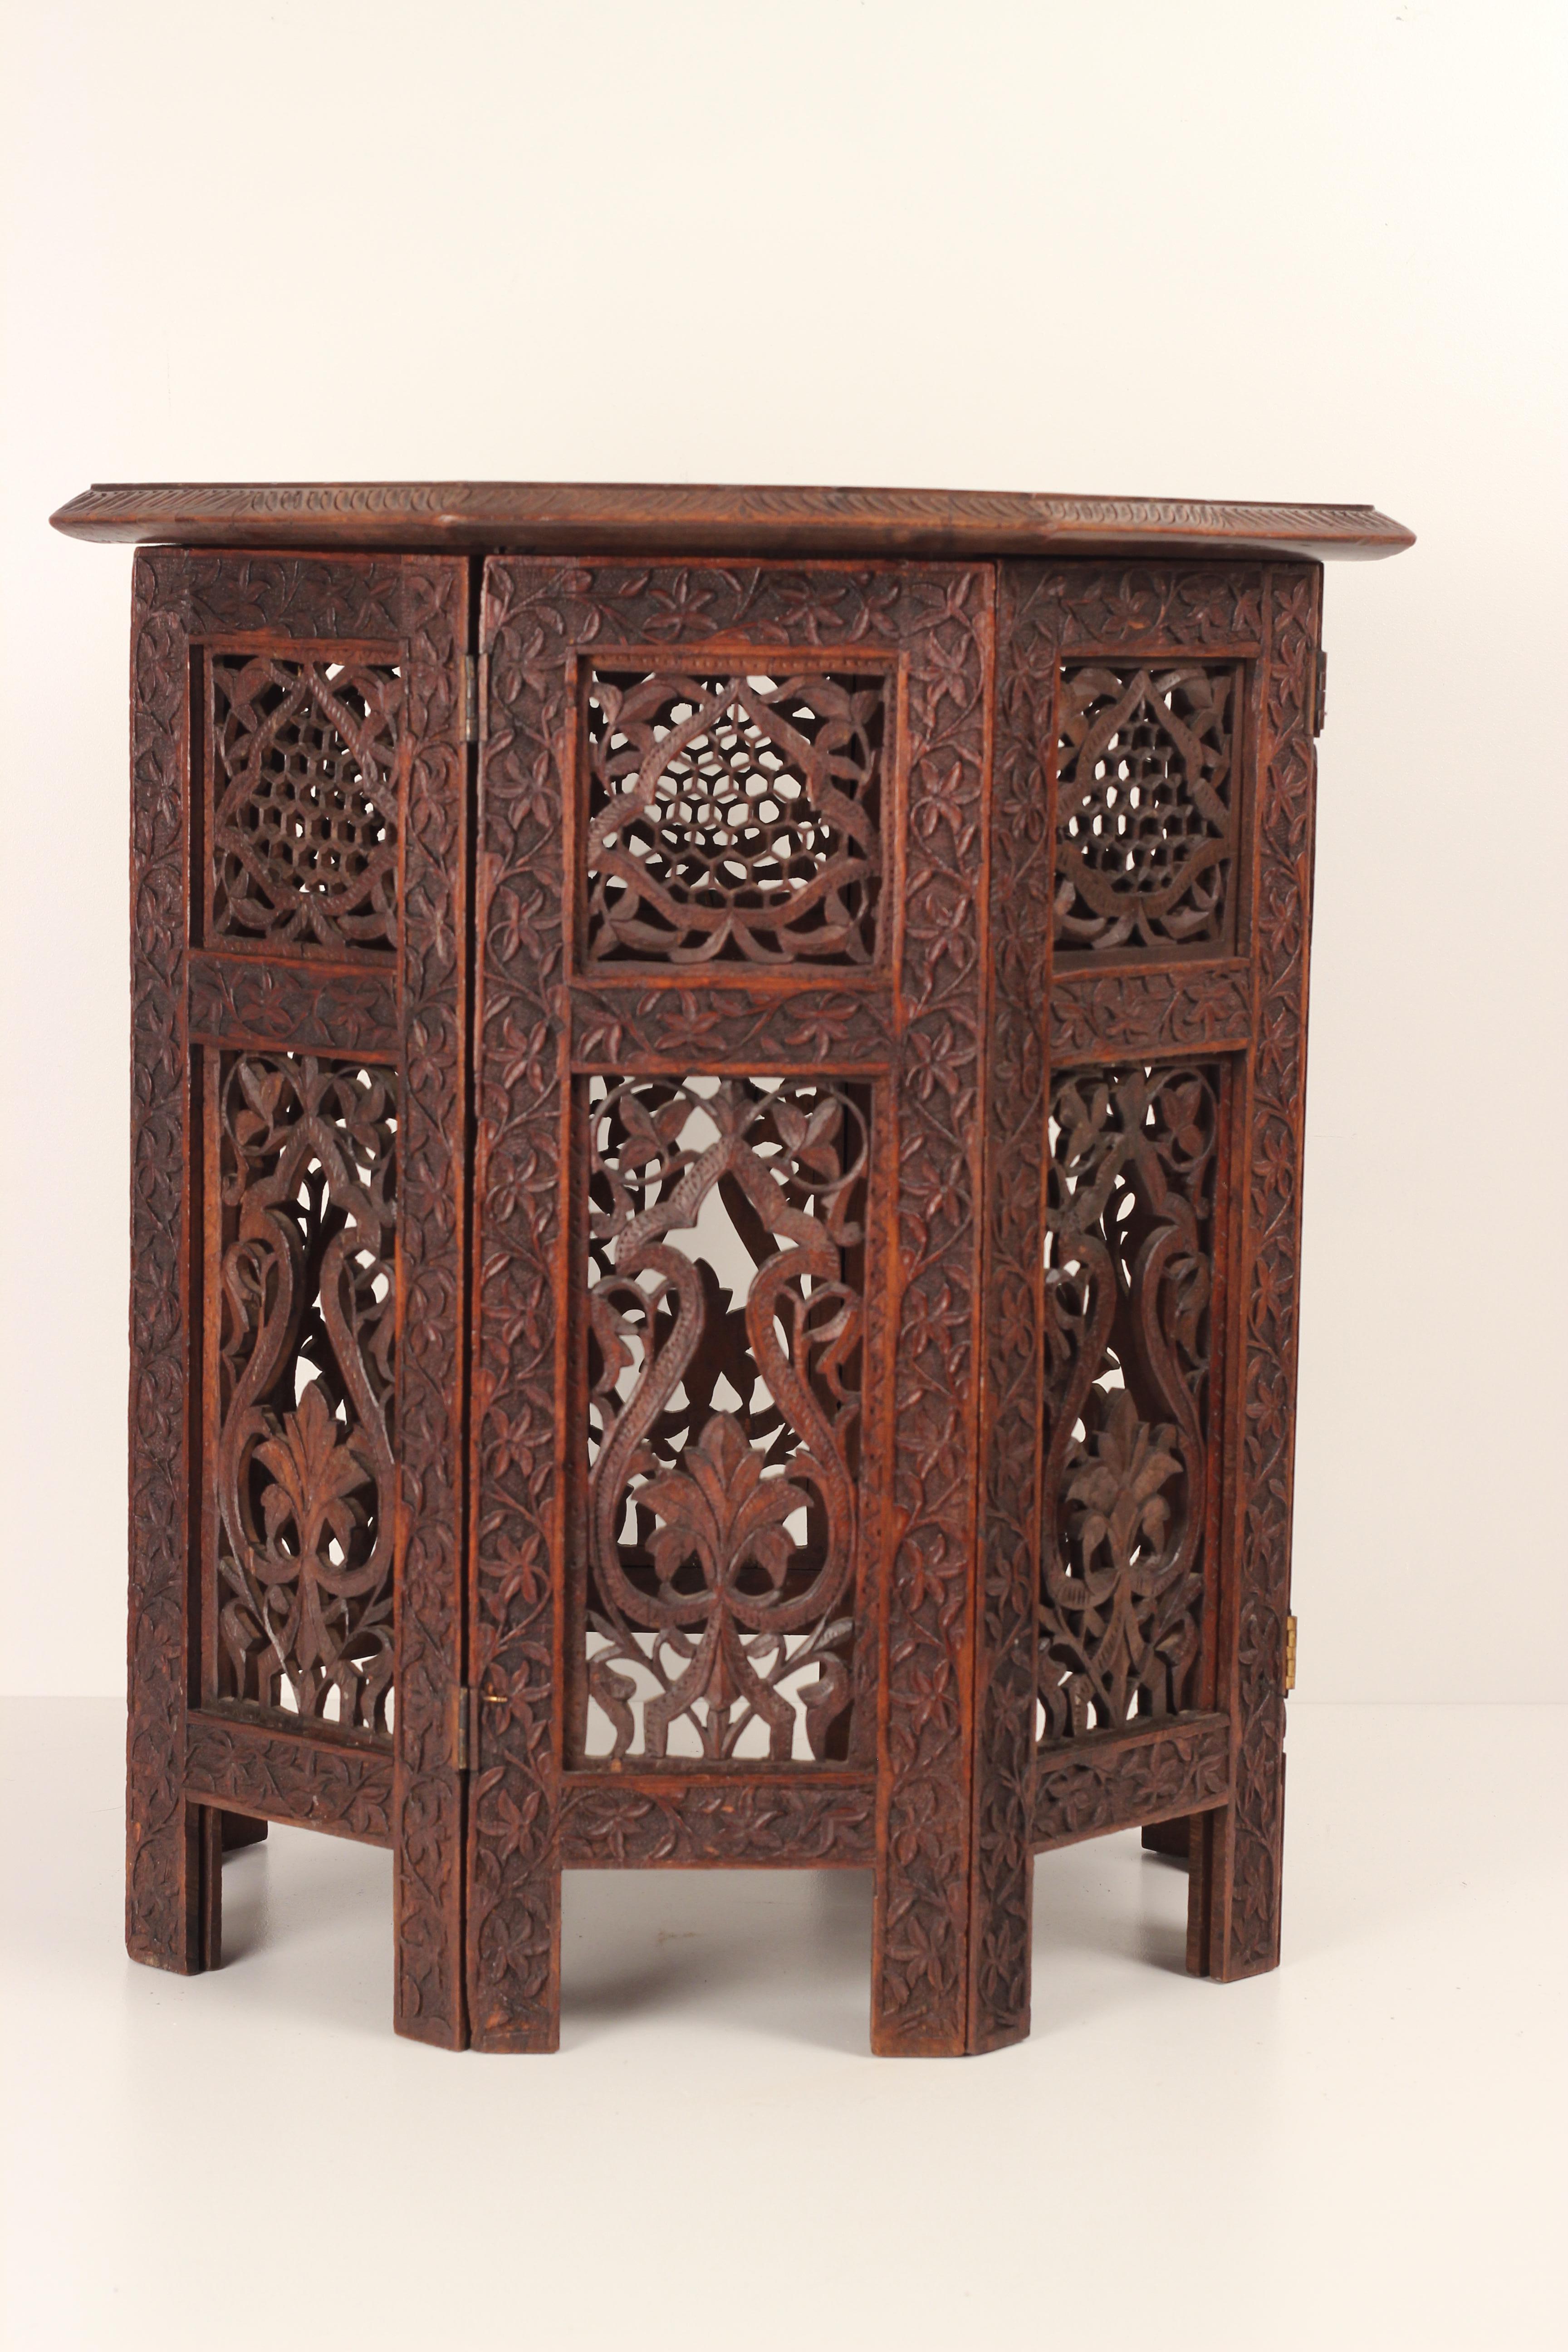 Late 19th Century Boho Chic style 19th Century Hand Carved Wooden Moorish Octagonal Table For Sale